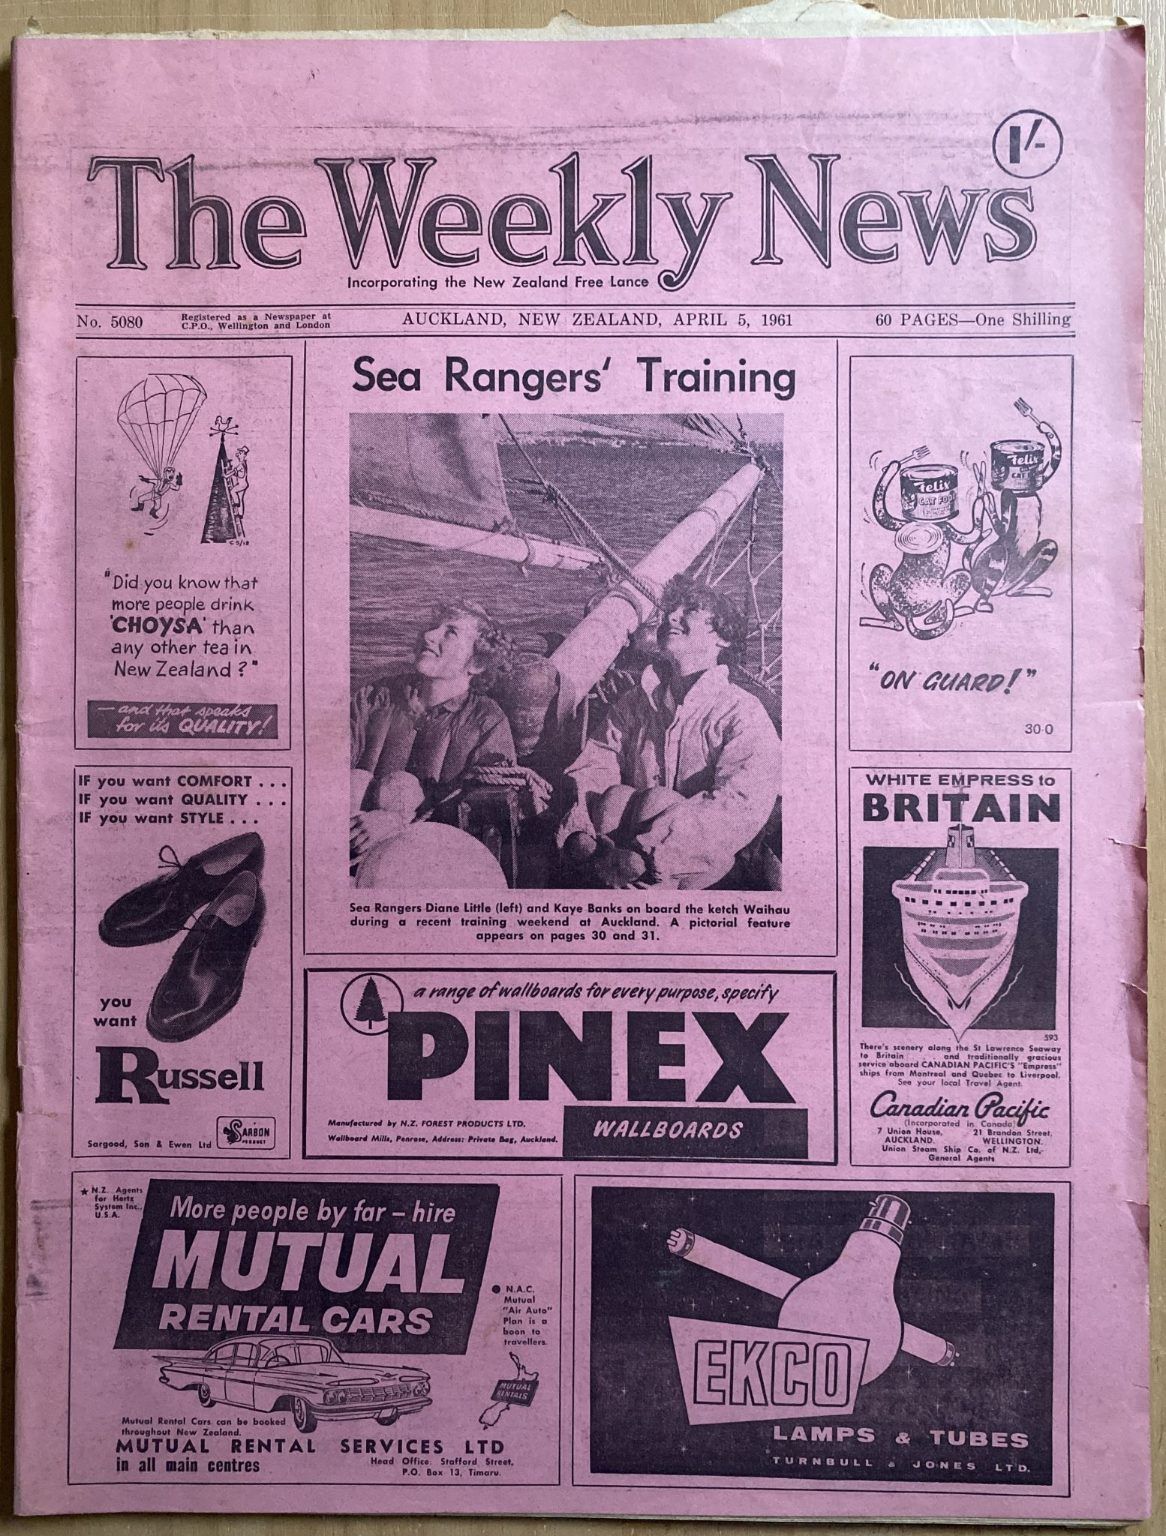 OLD NEWSPAPER: The Weekly News, No. 5080, 5 April 1961